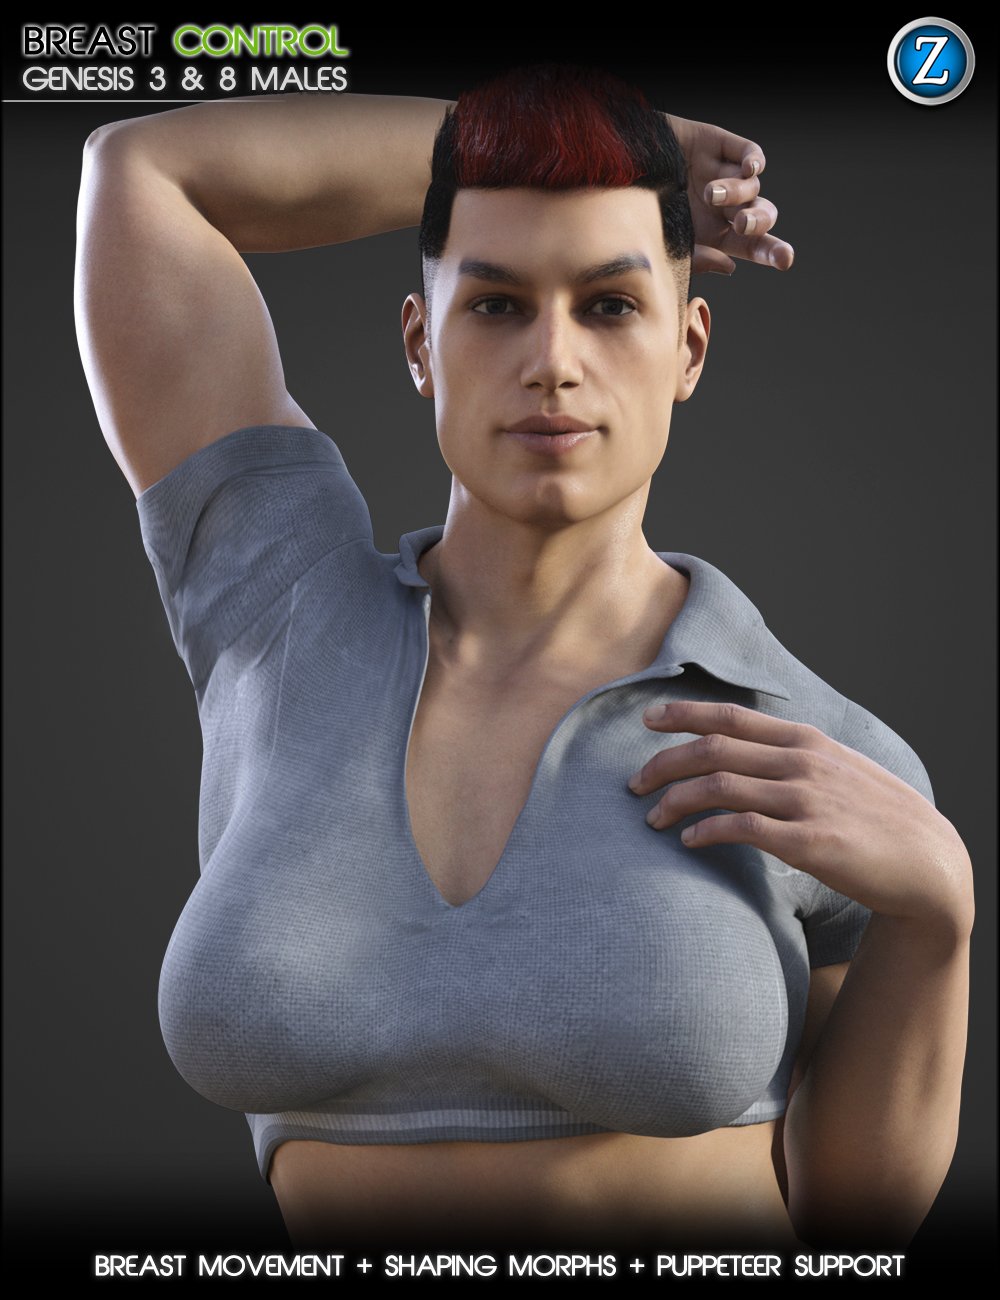 Breast Control For Genesis 3 And 8 Males Daz 3d